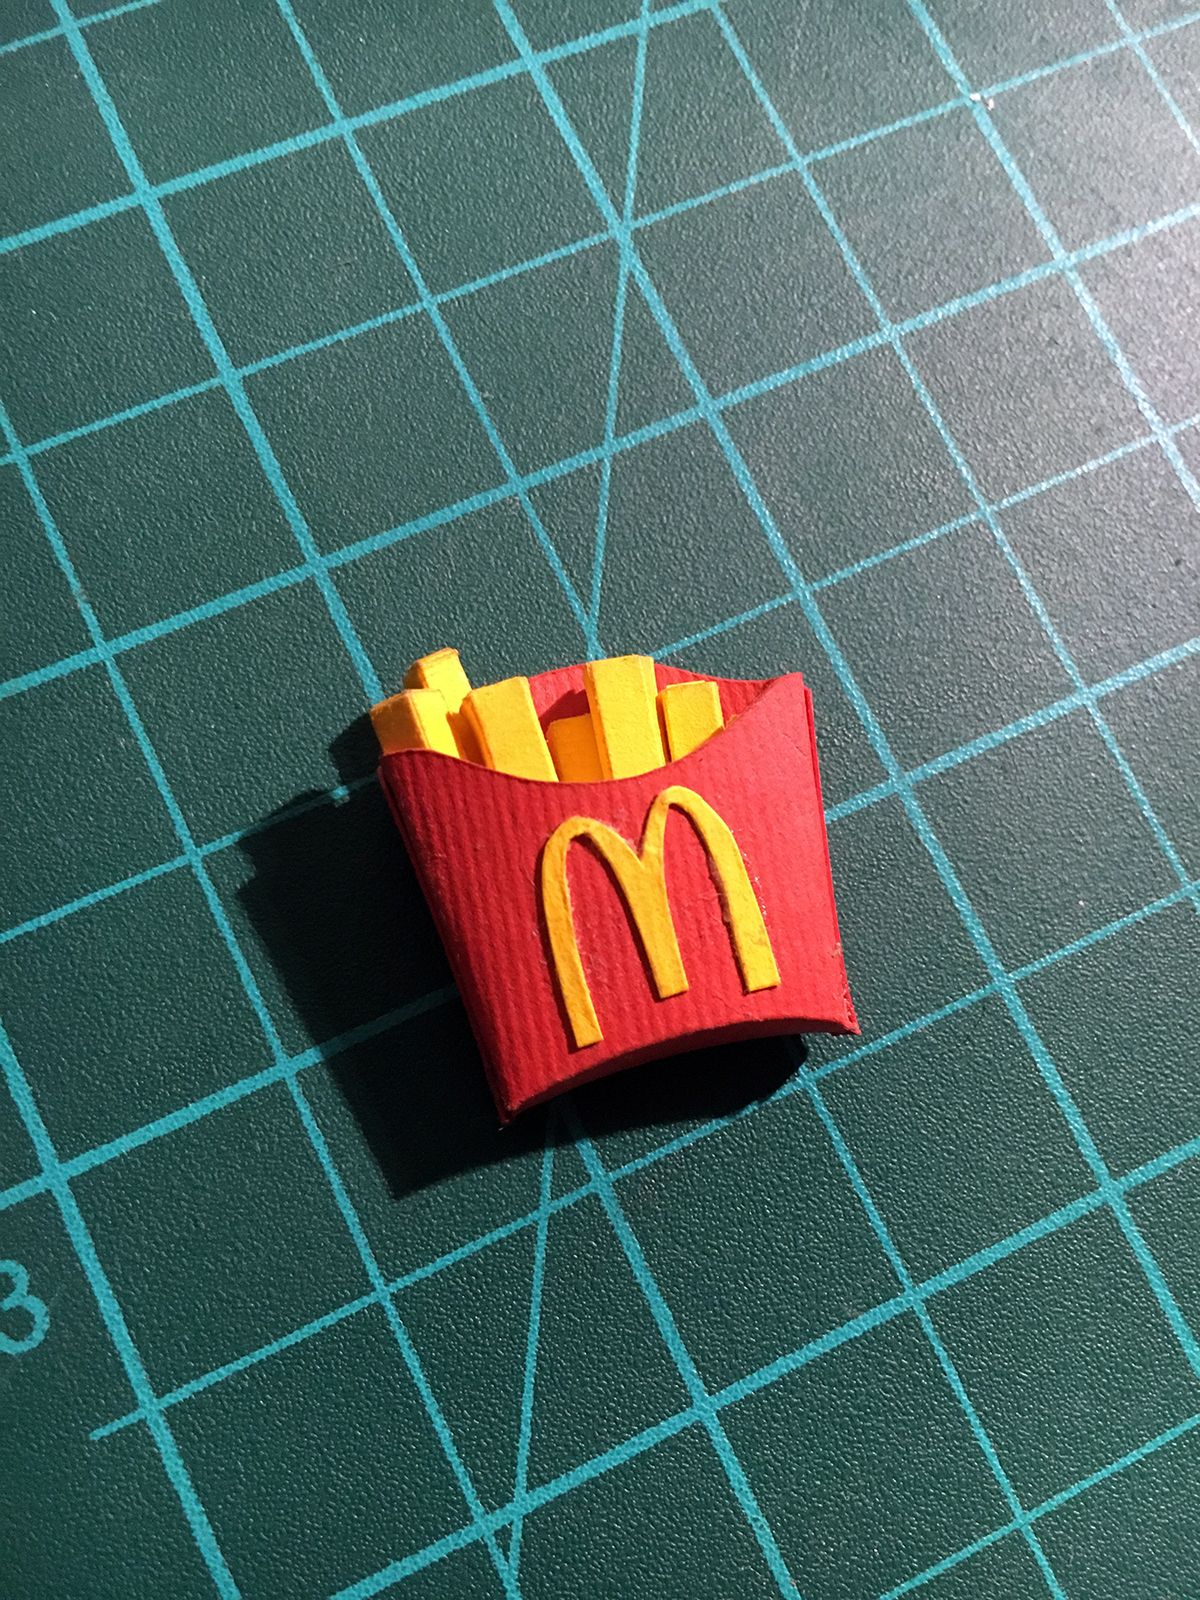 McDonalds Fries 3D paper red yellow